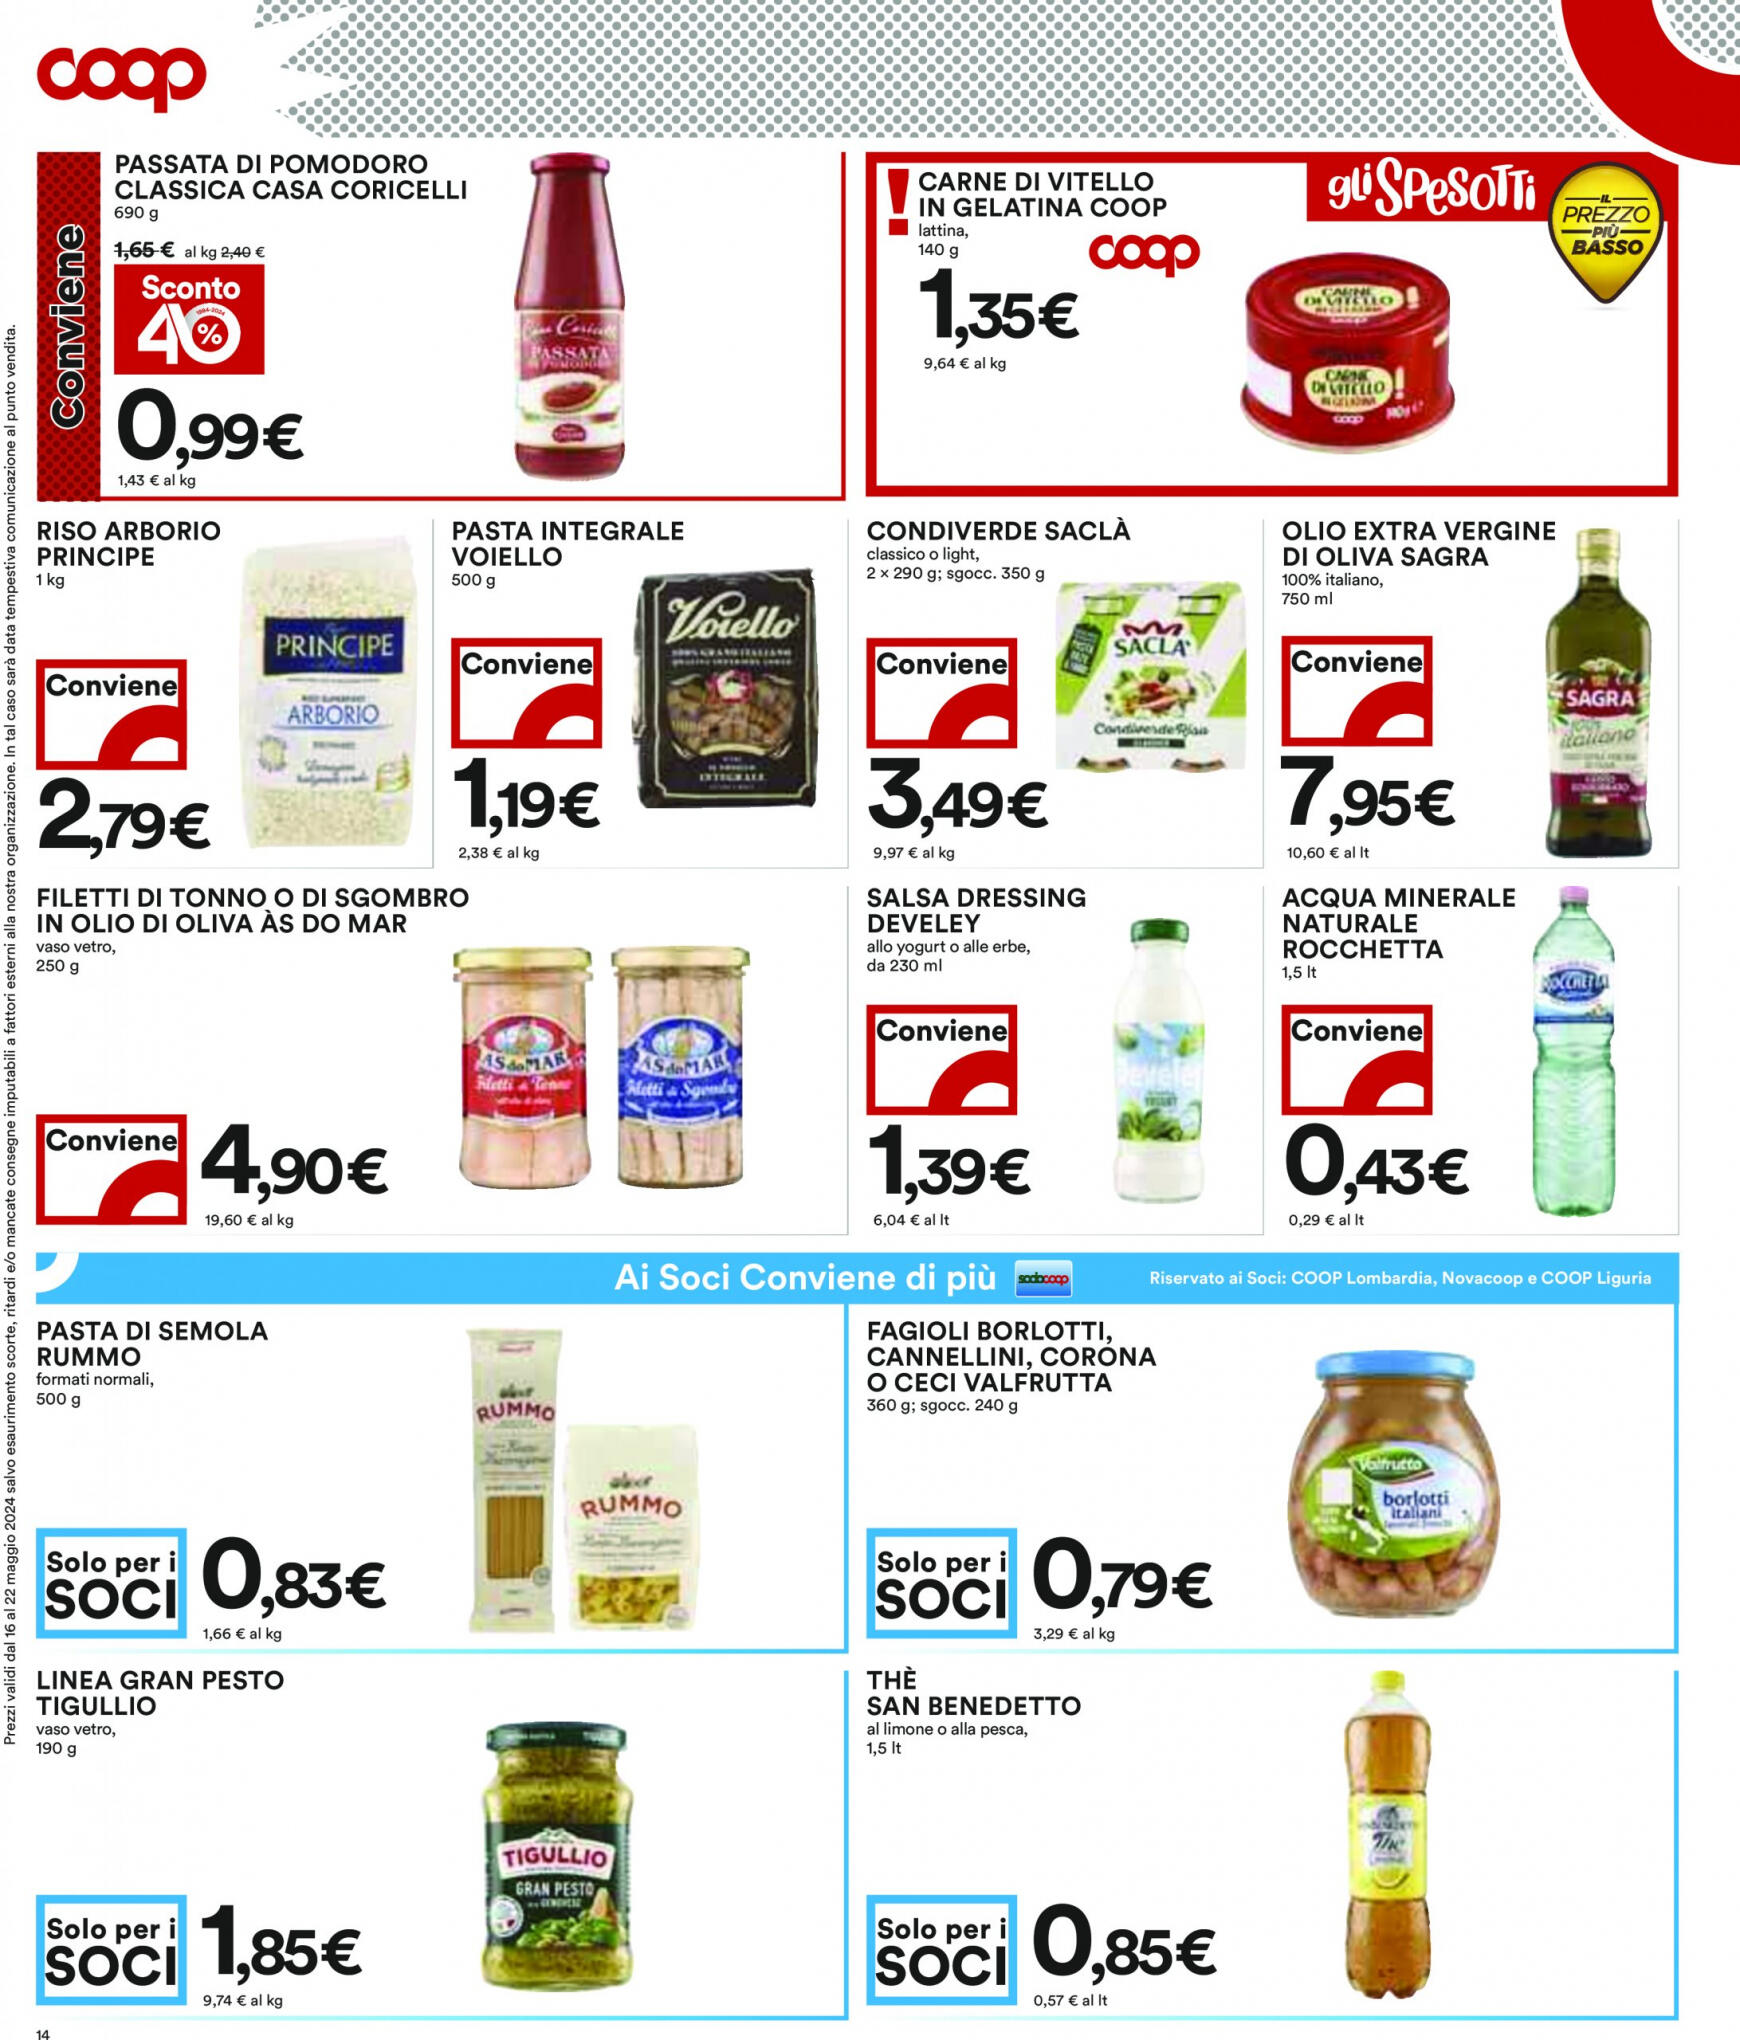 coop - Nuovo volantino Coop 16.05. - 22.05. - page: 14